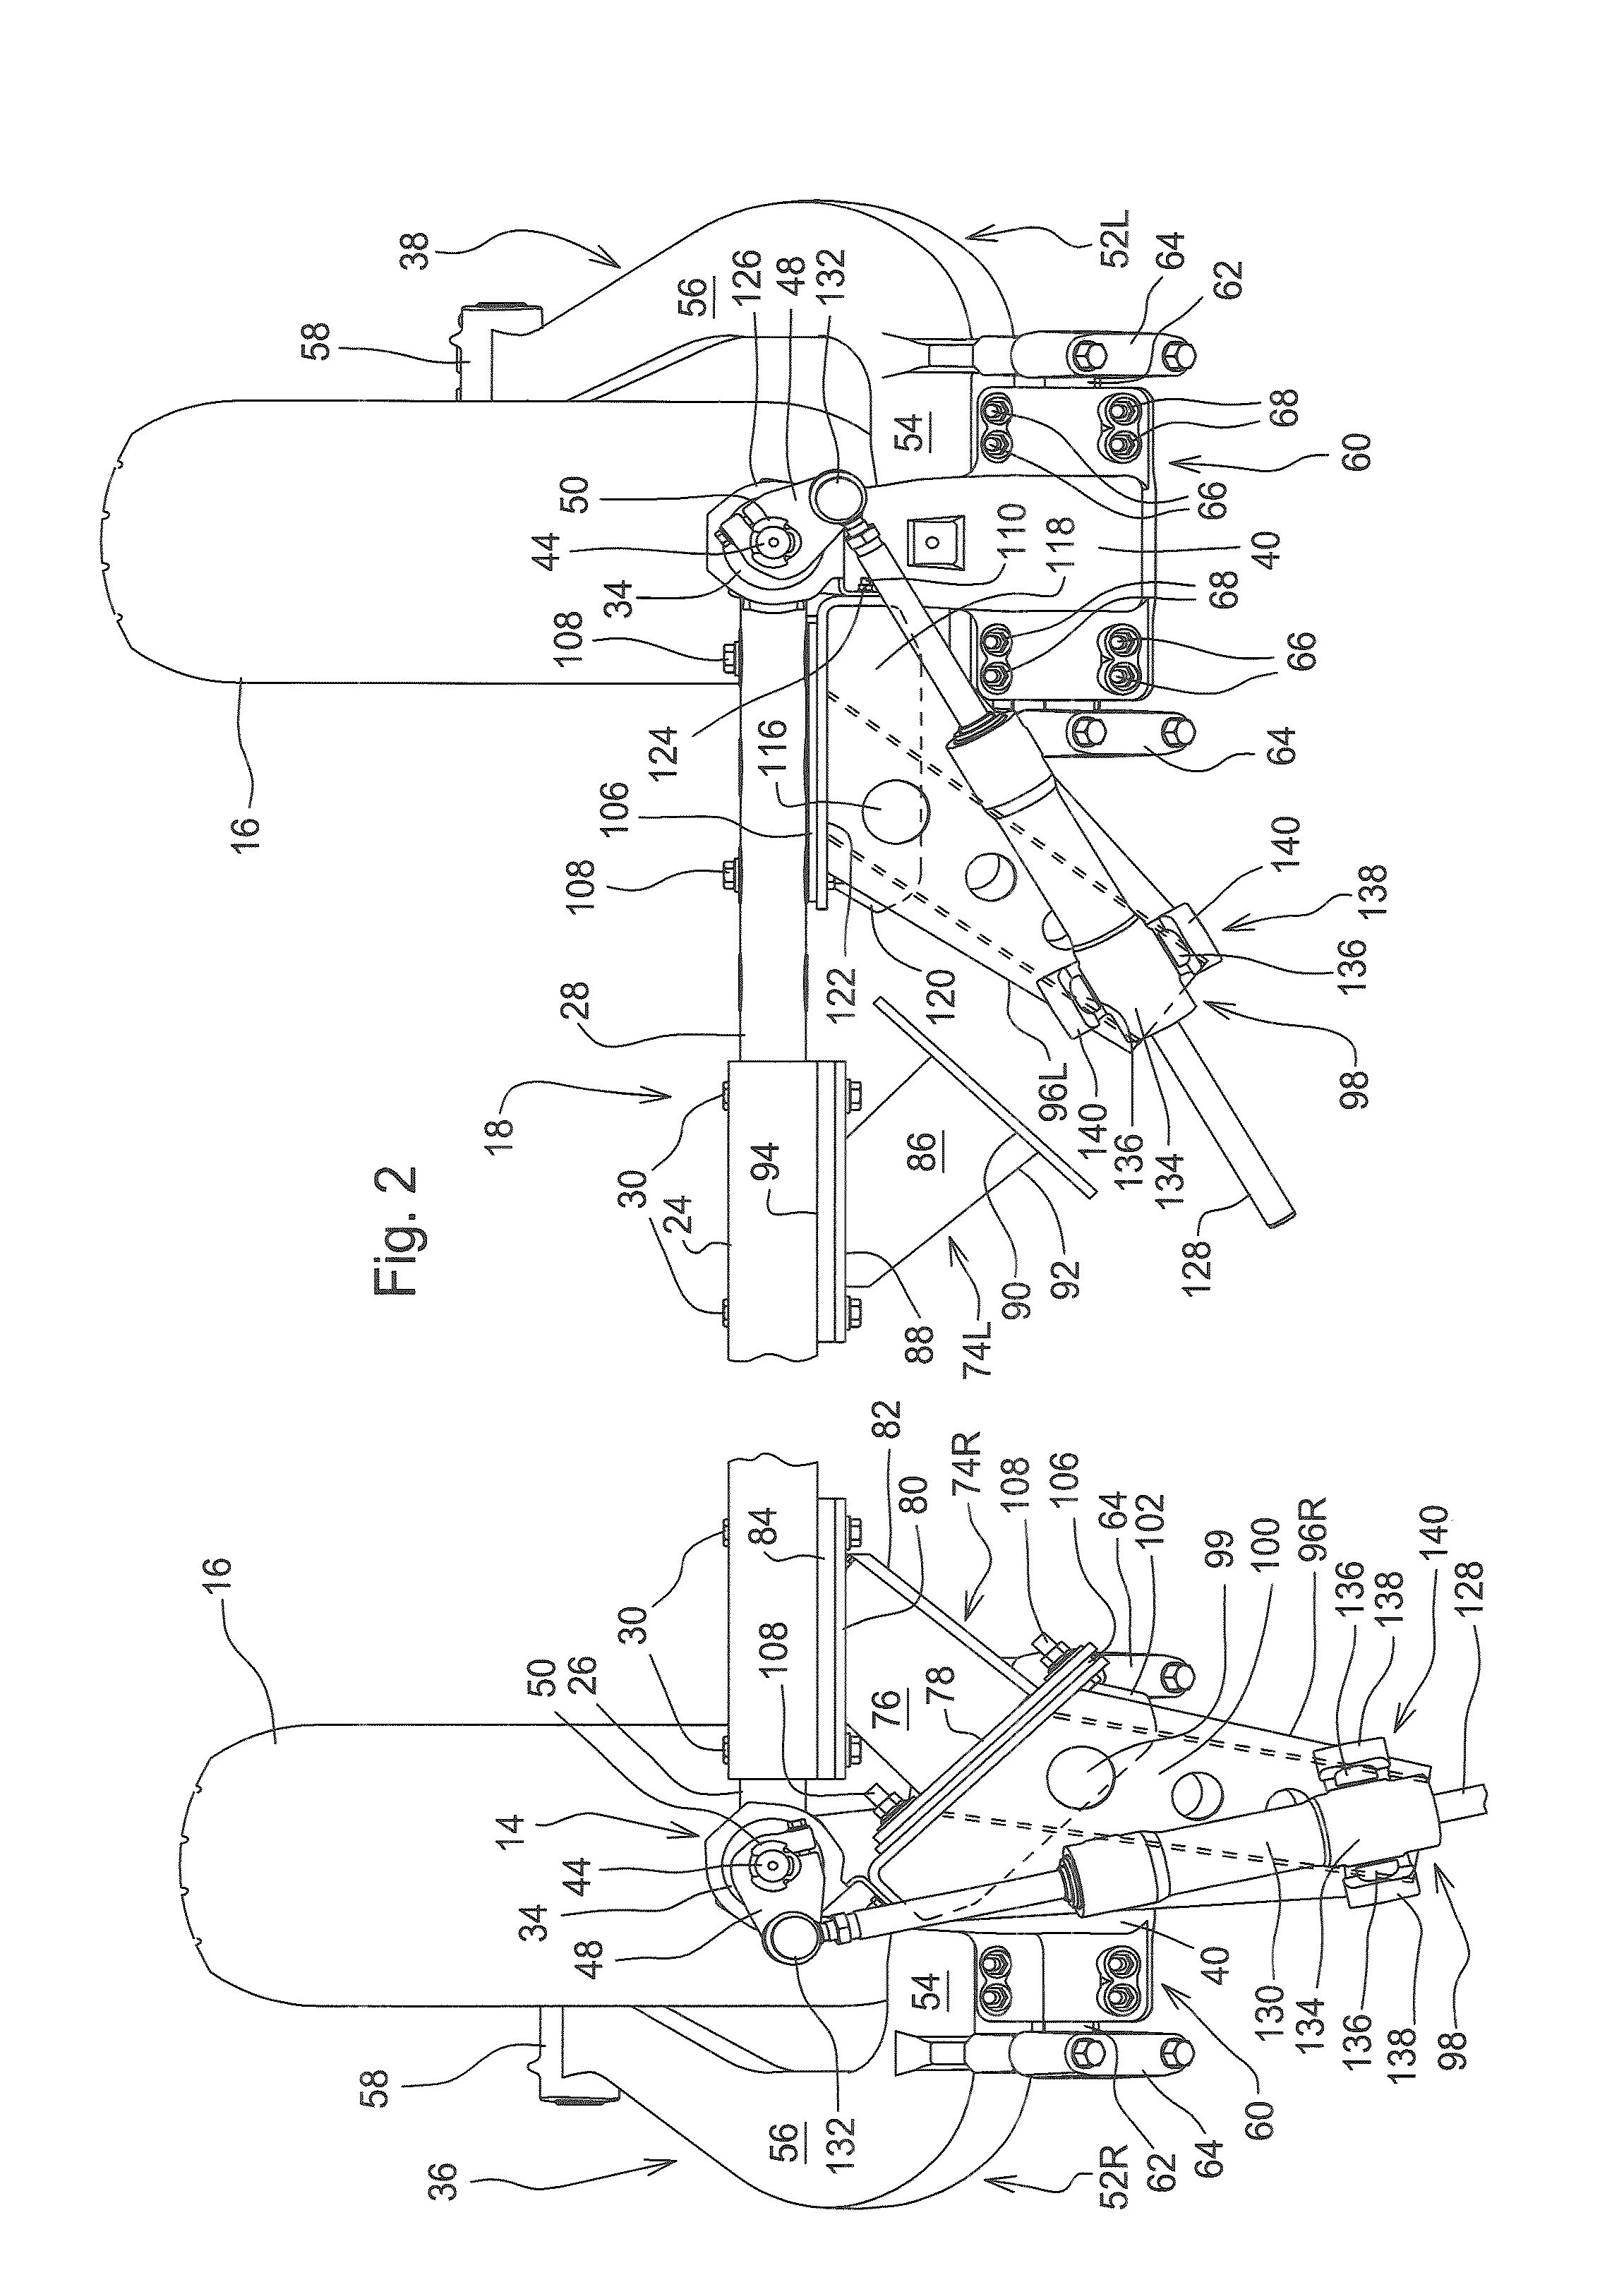 Steering cylinder mounting arrangement used with a length-adjustable axle